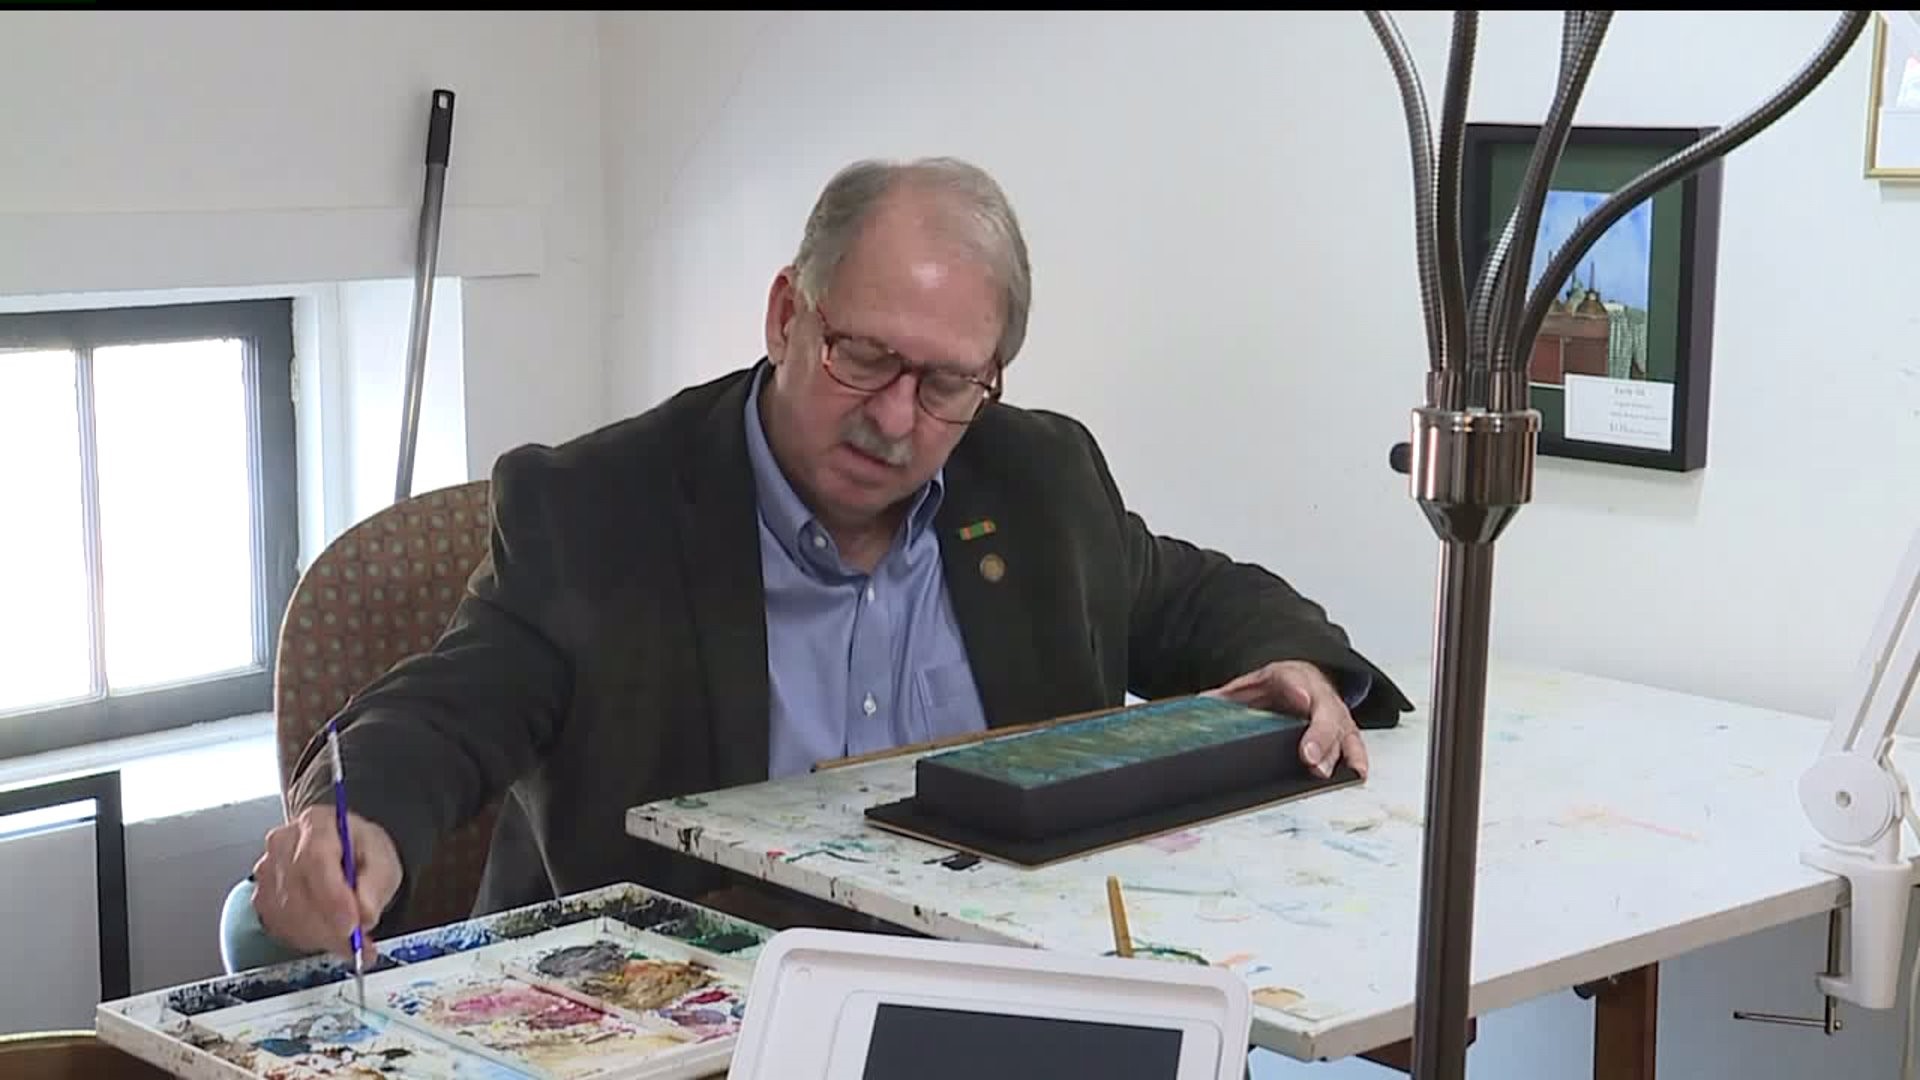 Local artist to auction off priceless painting